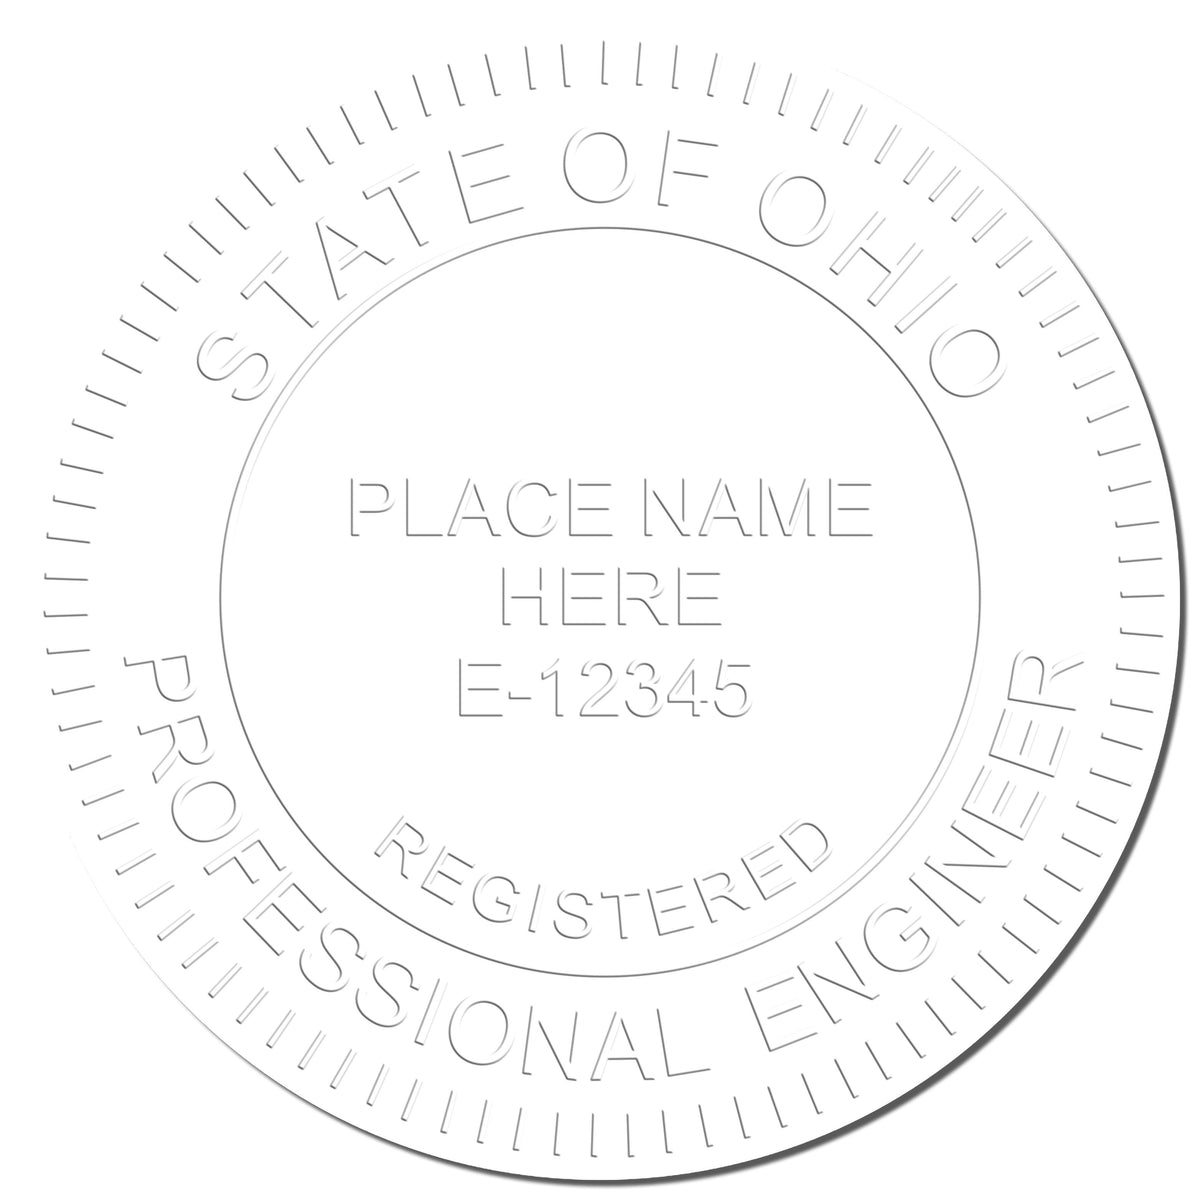 The Soft Ohio Professional Engineer Seal stamp impression comes to life with a crisp, detailed photo on paper - showcasing true professional quality.